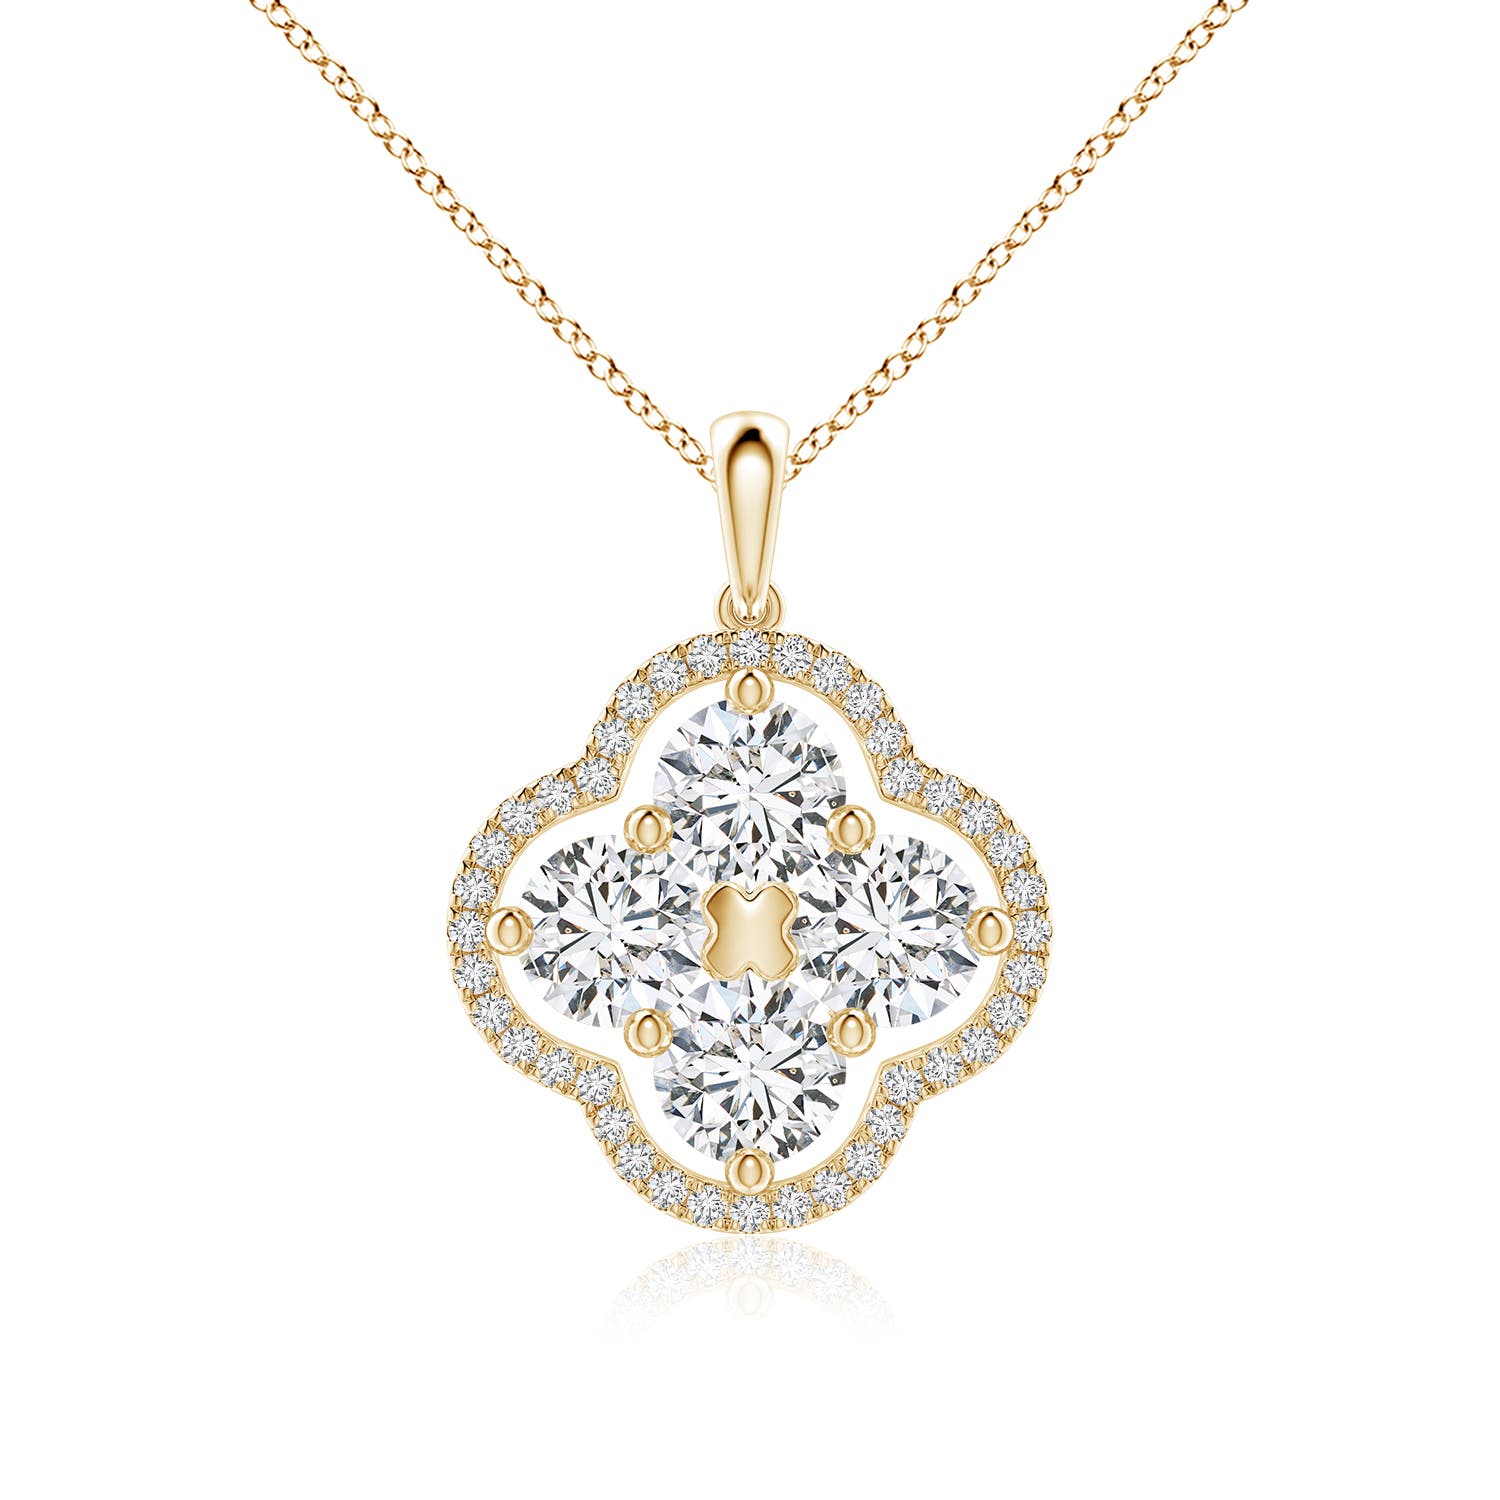 H, SI2 / 2.2 CT / 18 KT Yellow Gold